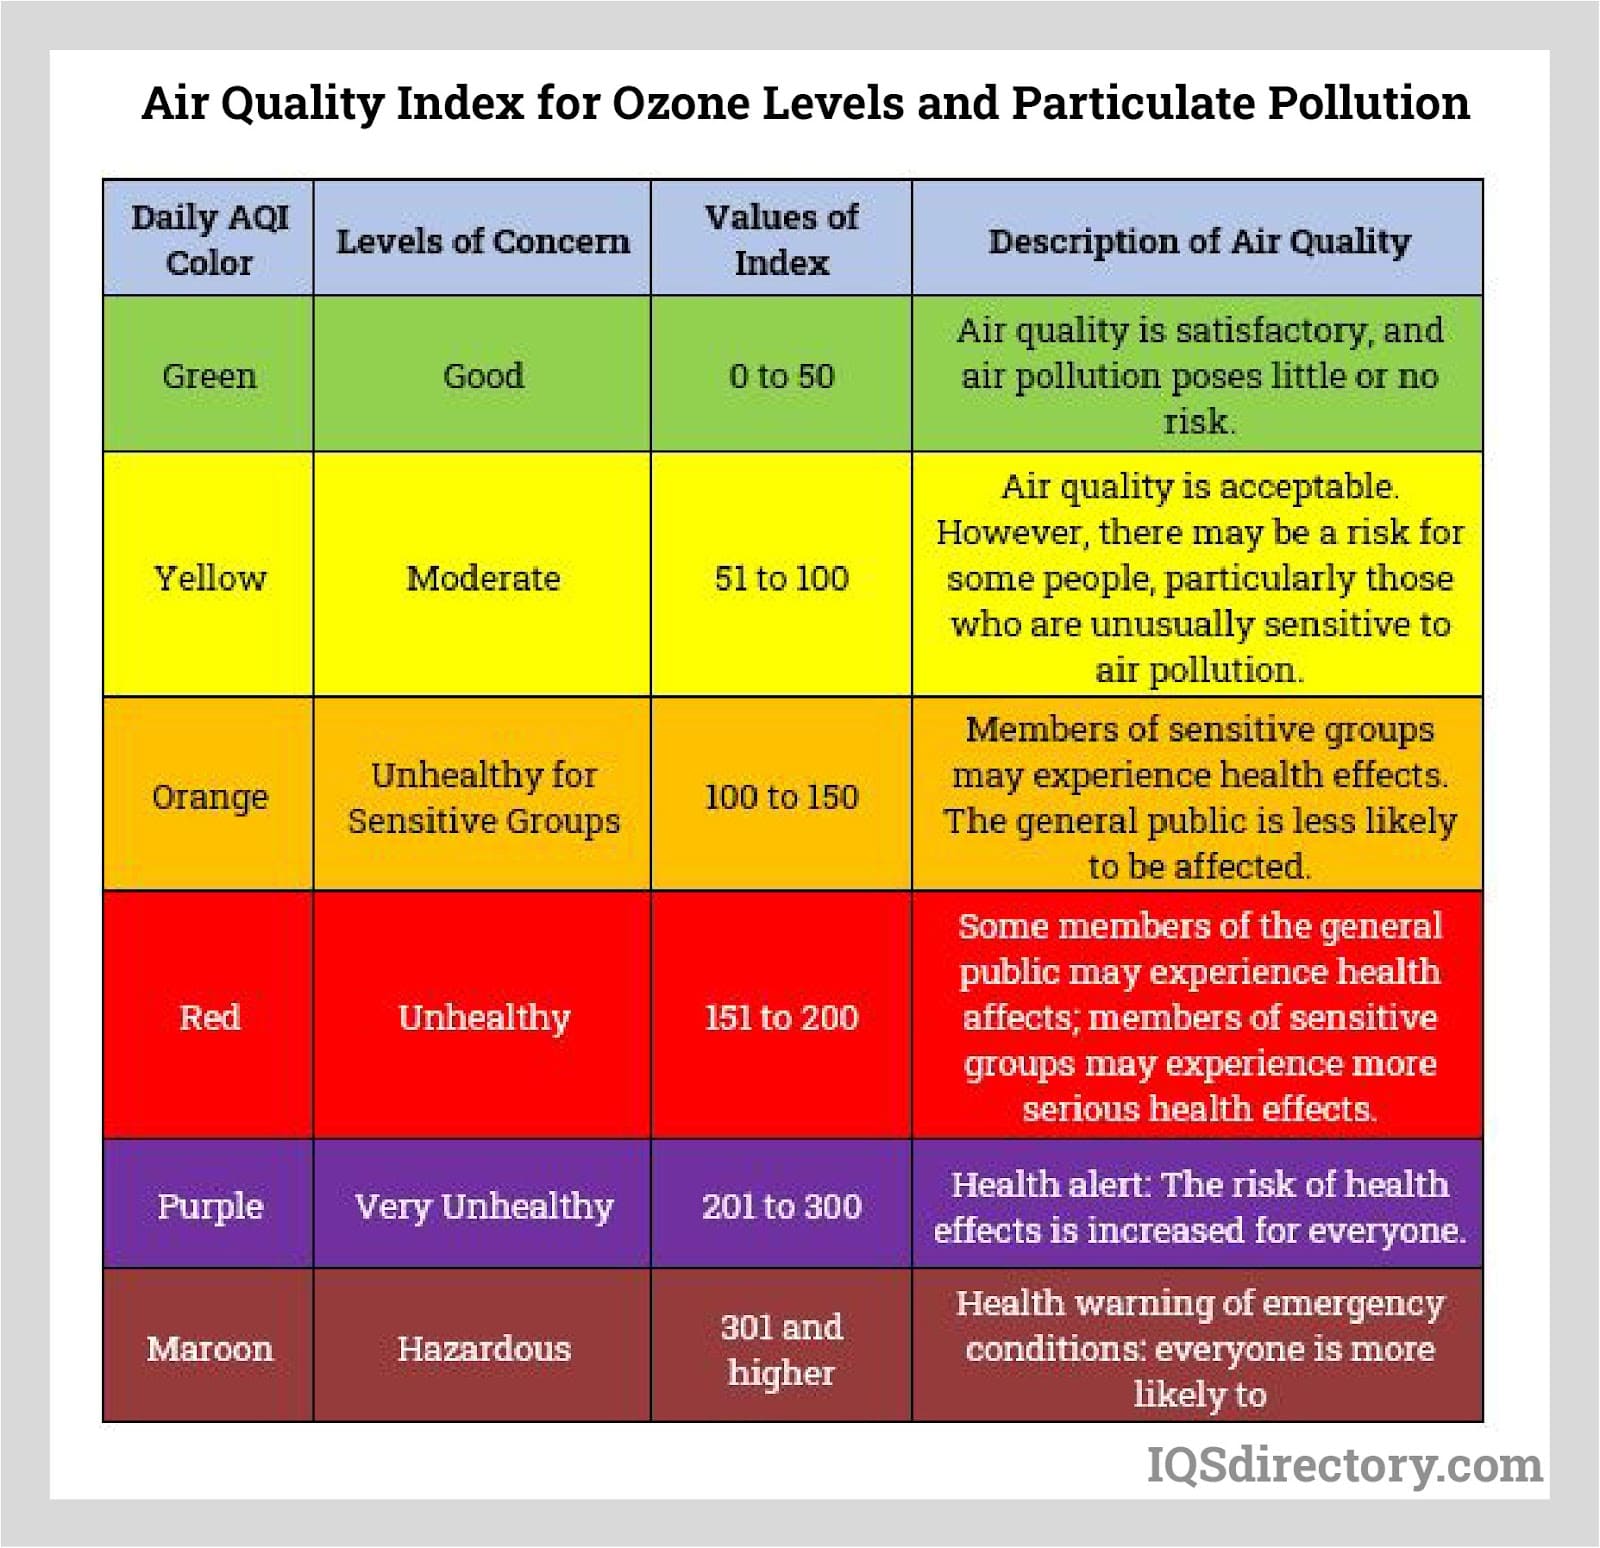 Air Quality Index for Ozone Levels and Particulate Pollution